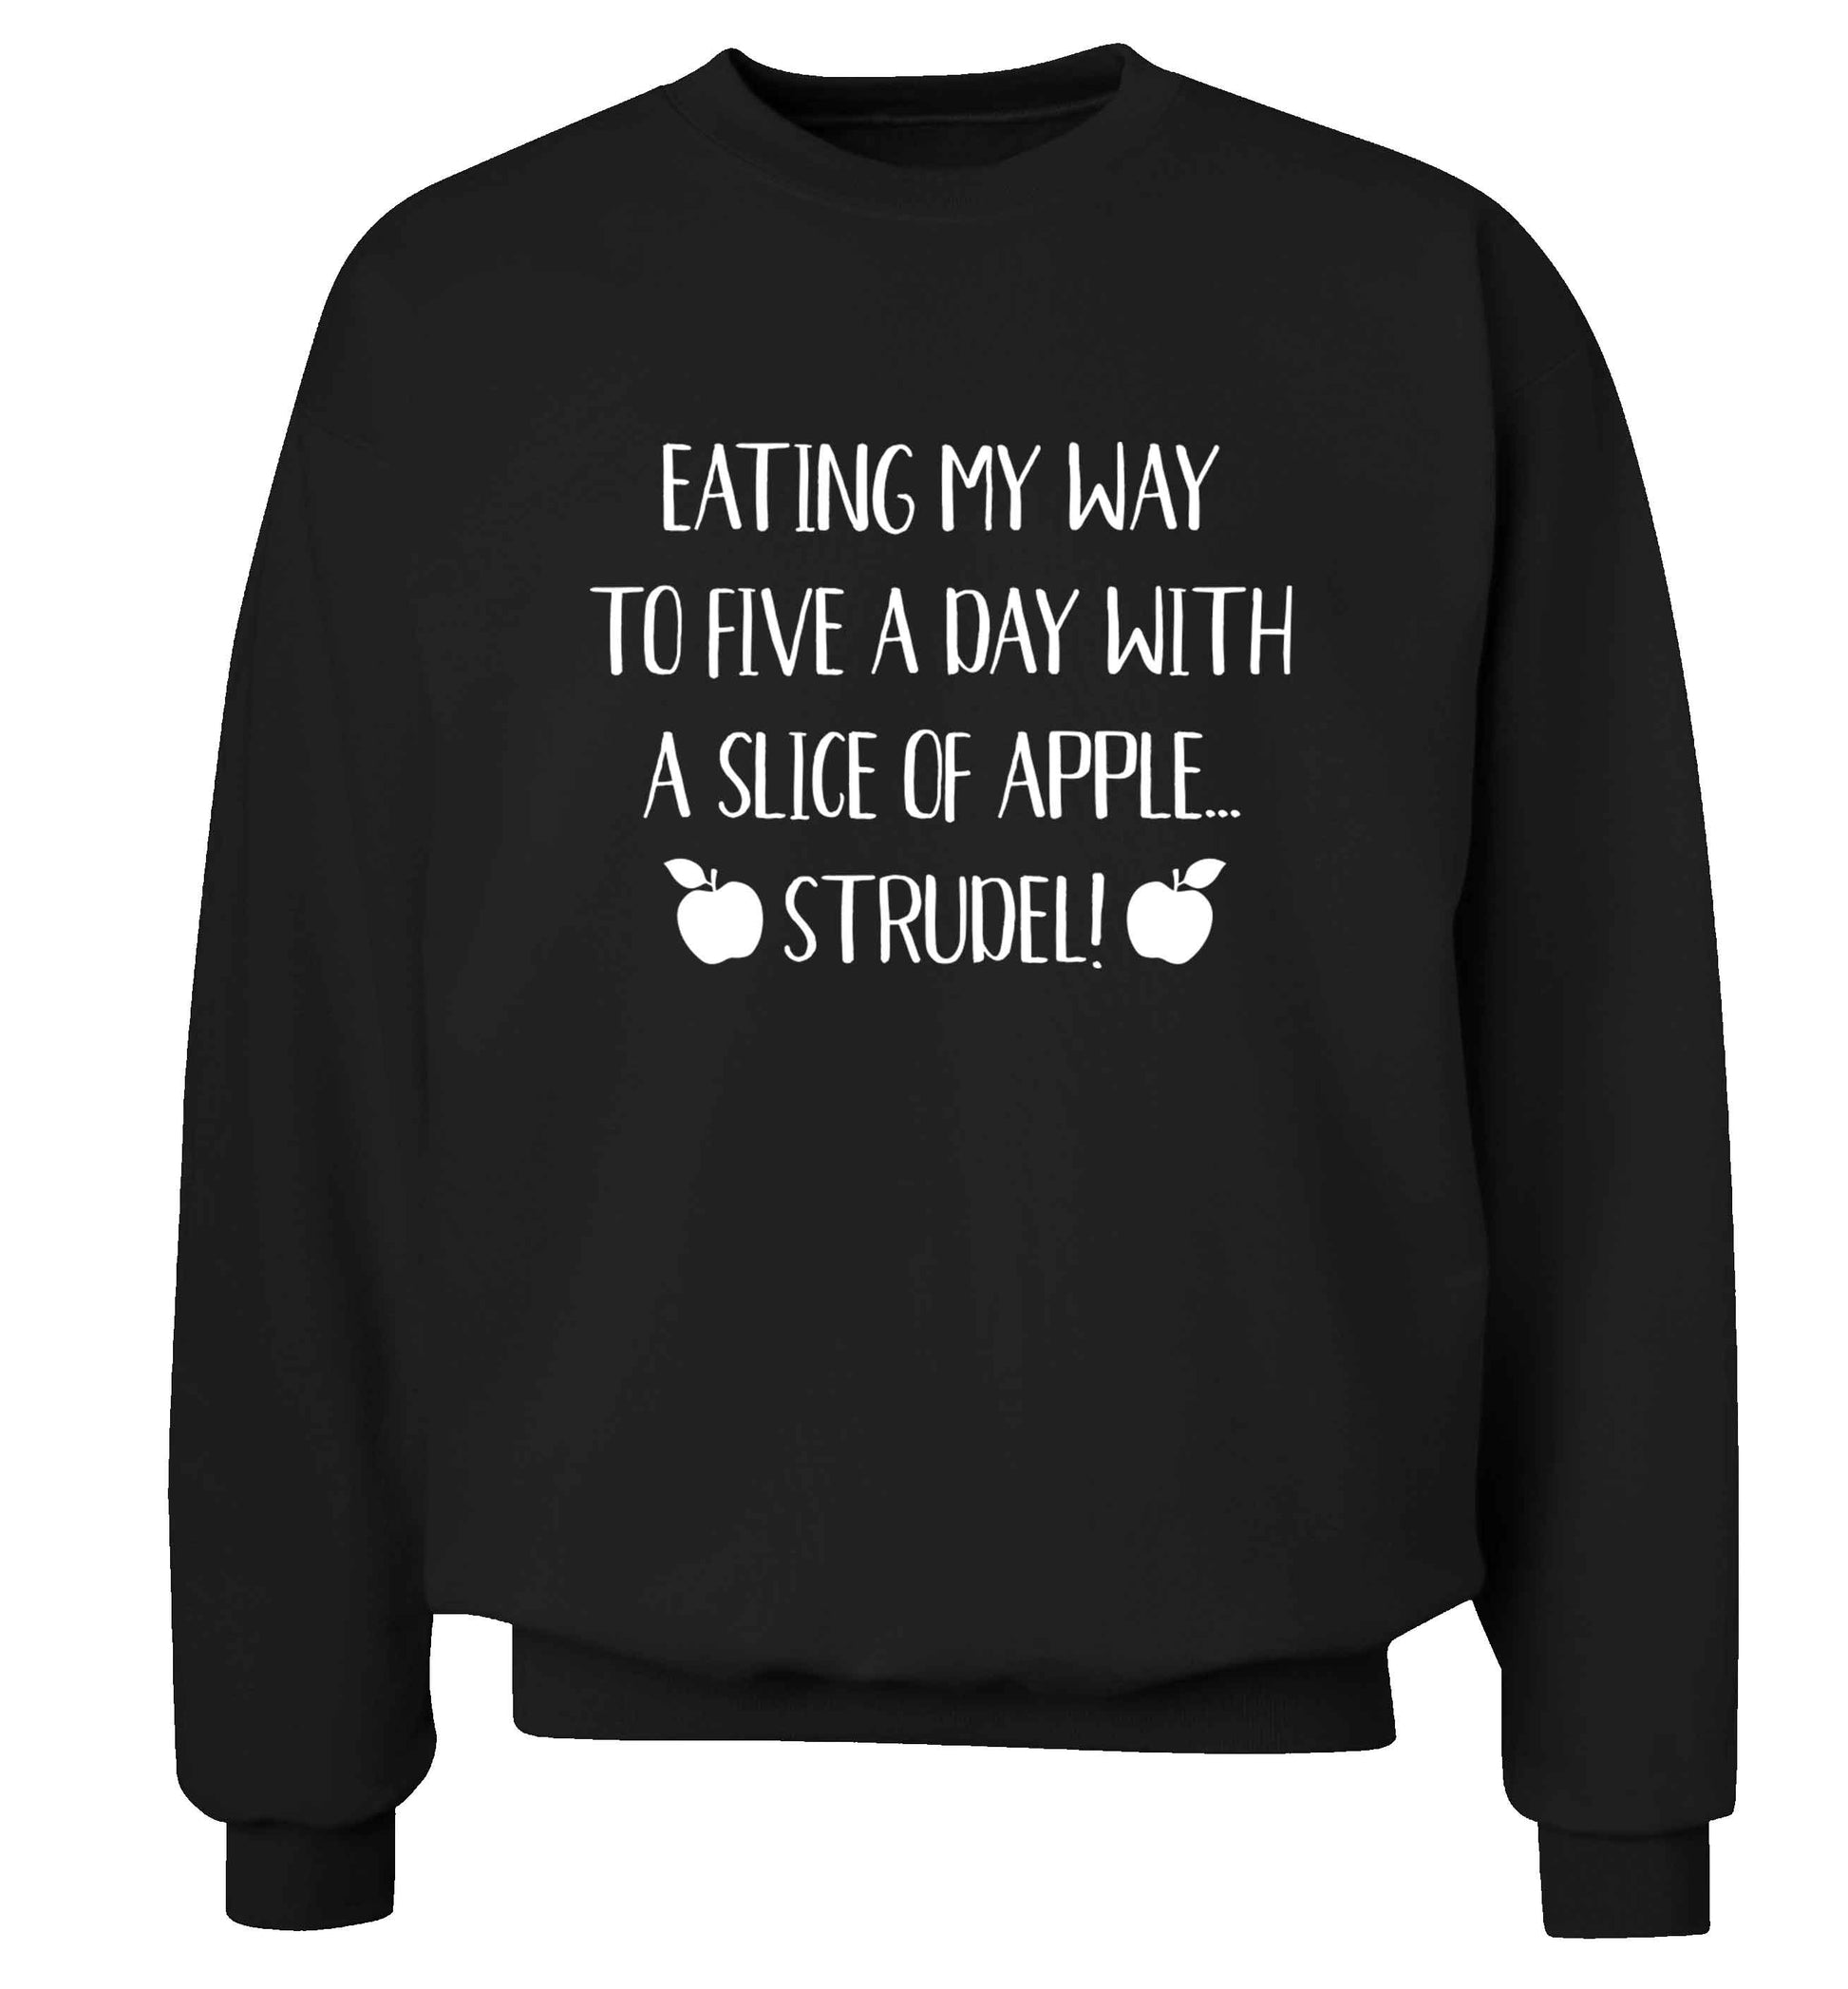 Eating my way to five a day with a slice of apple strudel Adult's unisex black Sweater 2XL